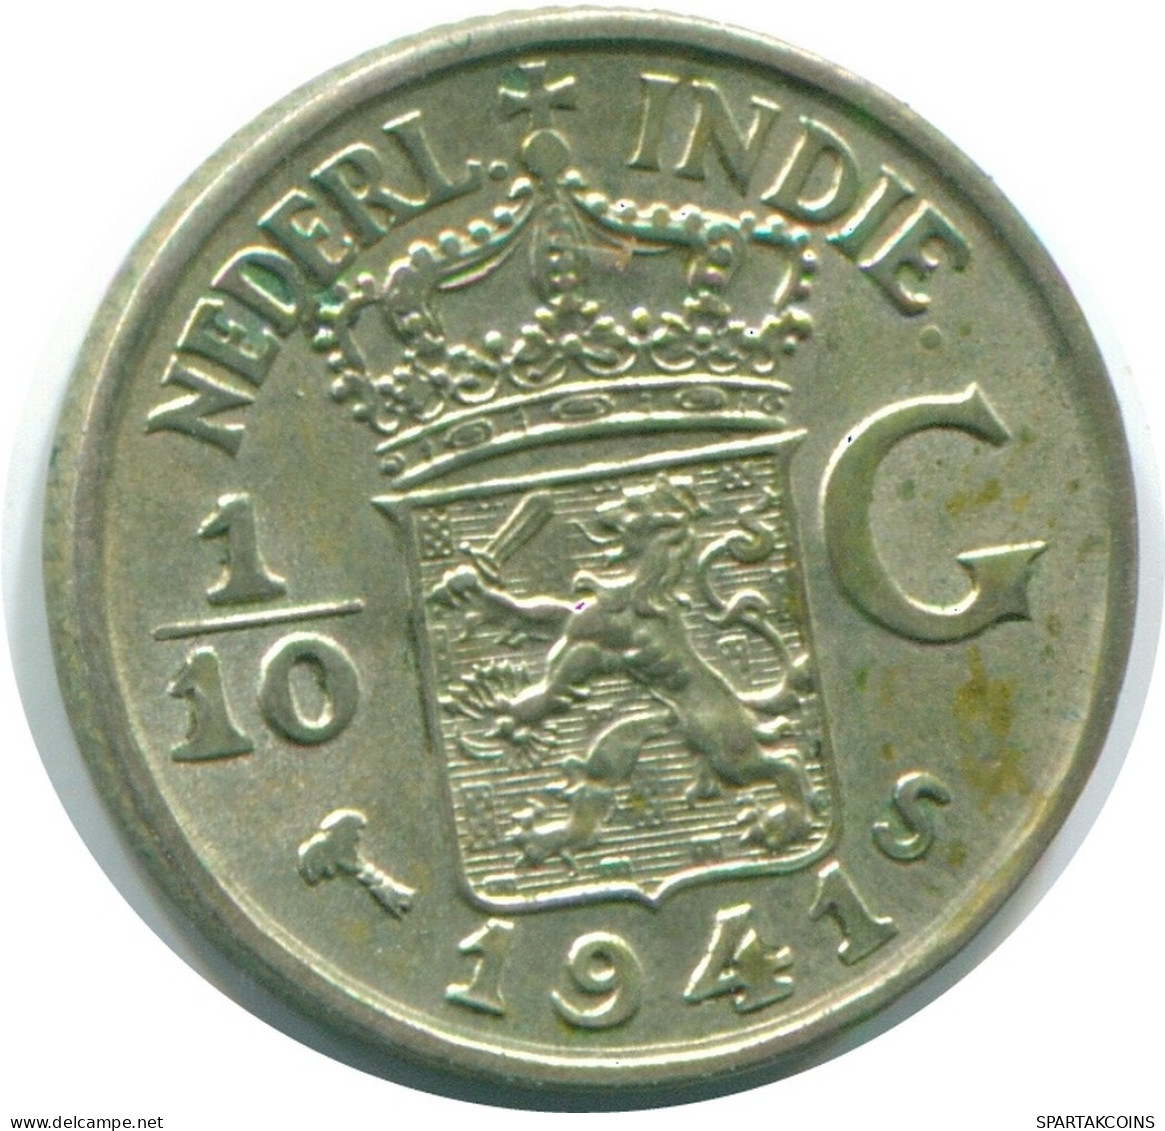 1/10 GULDEN 1941 S NETHERLANDS EAST INDIES SILVER Colonial Coin #NL13818.3.U.A - Dutch East Indies